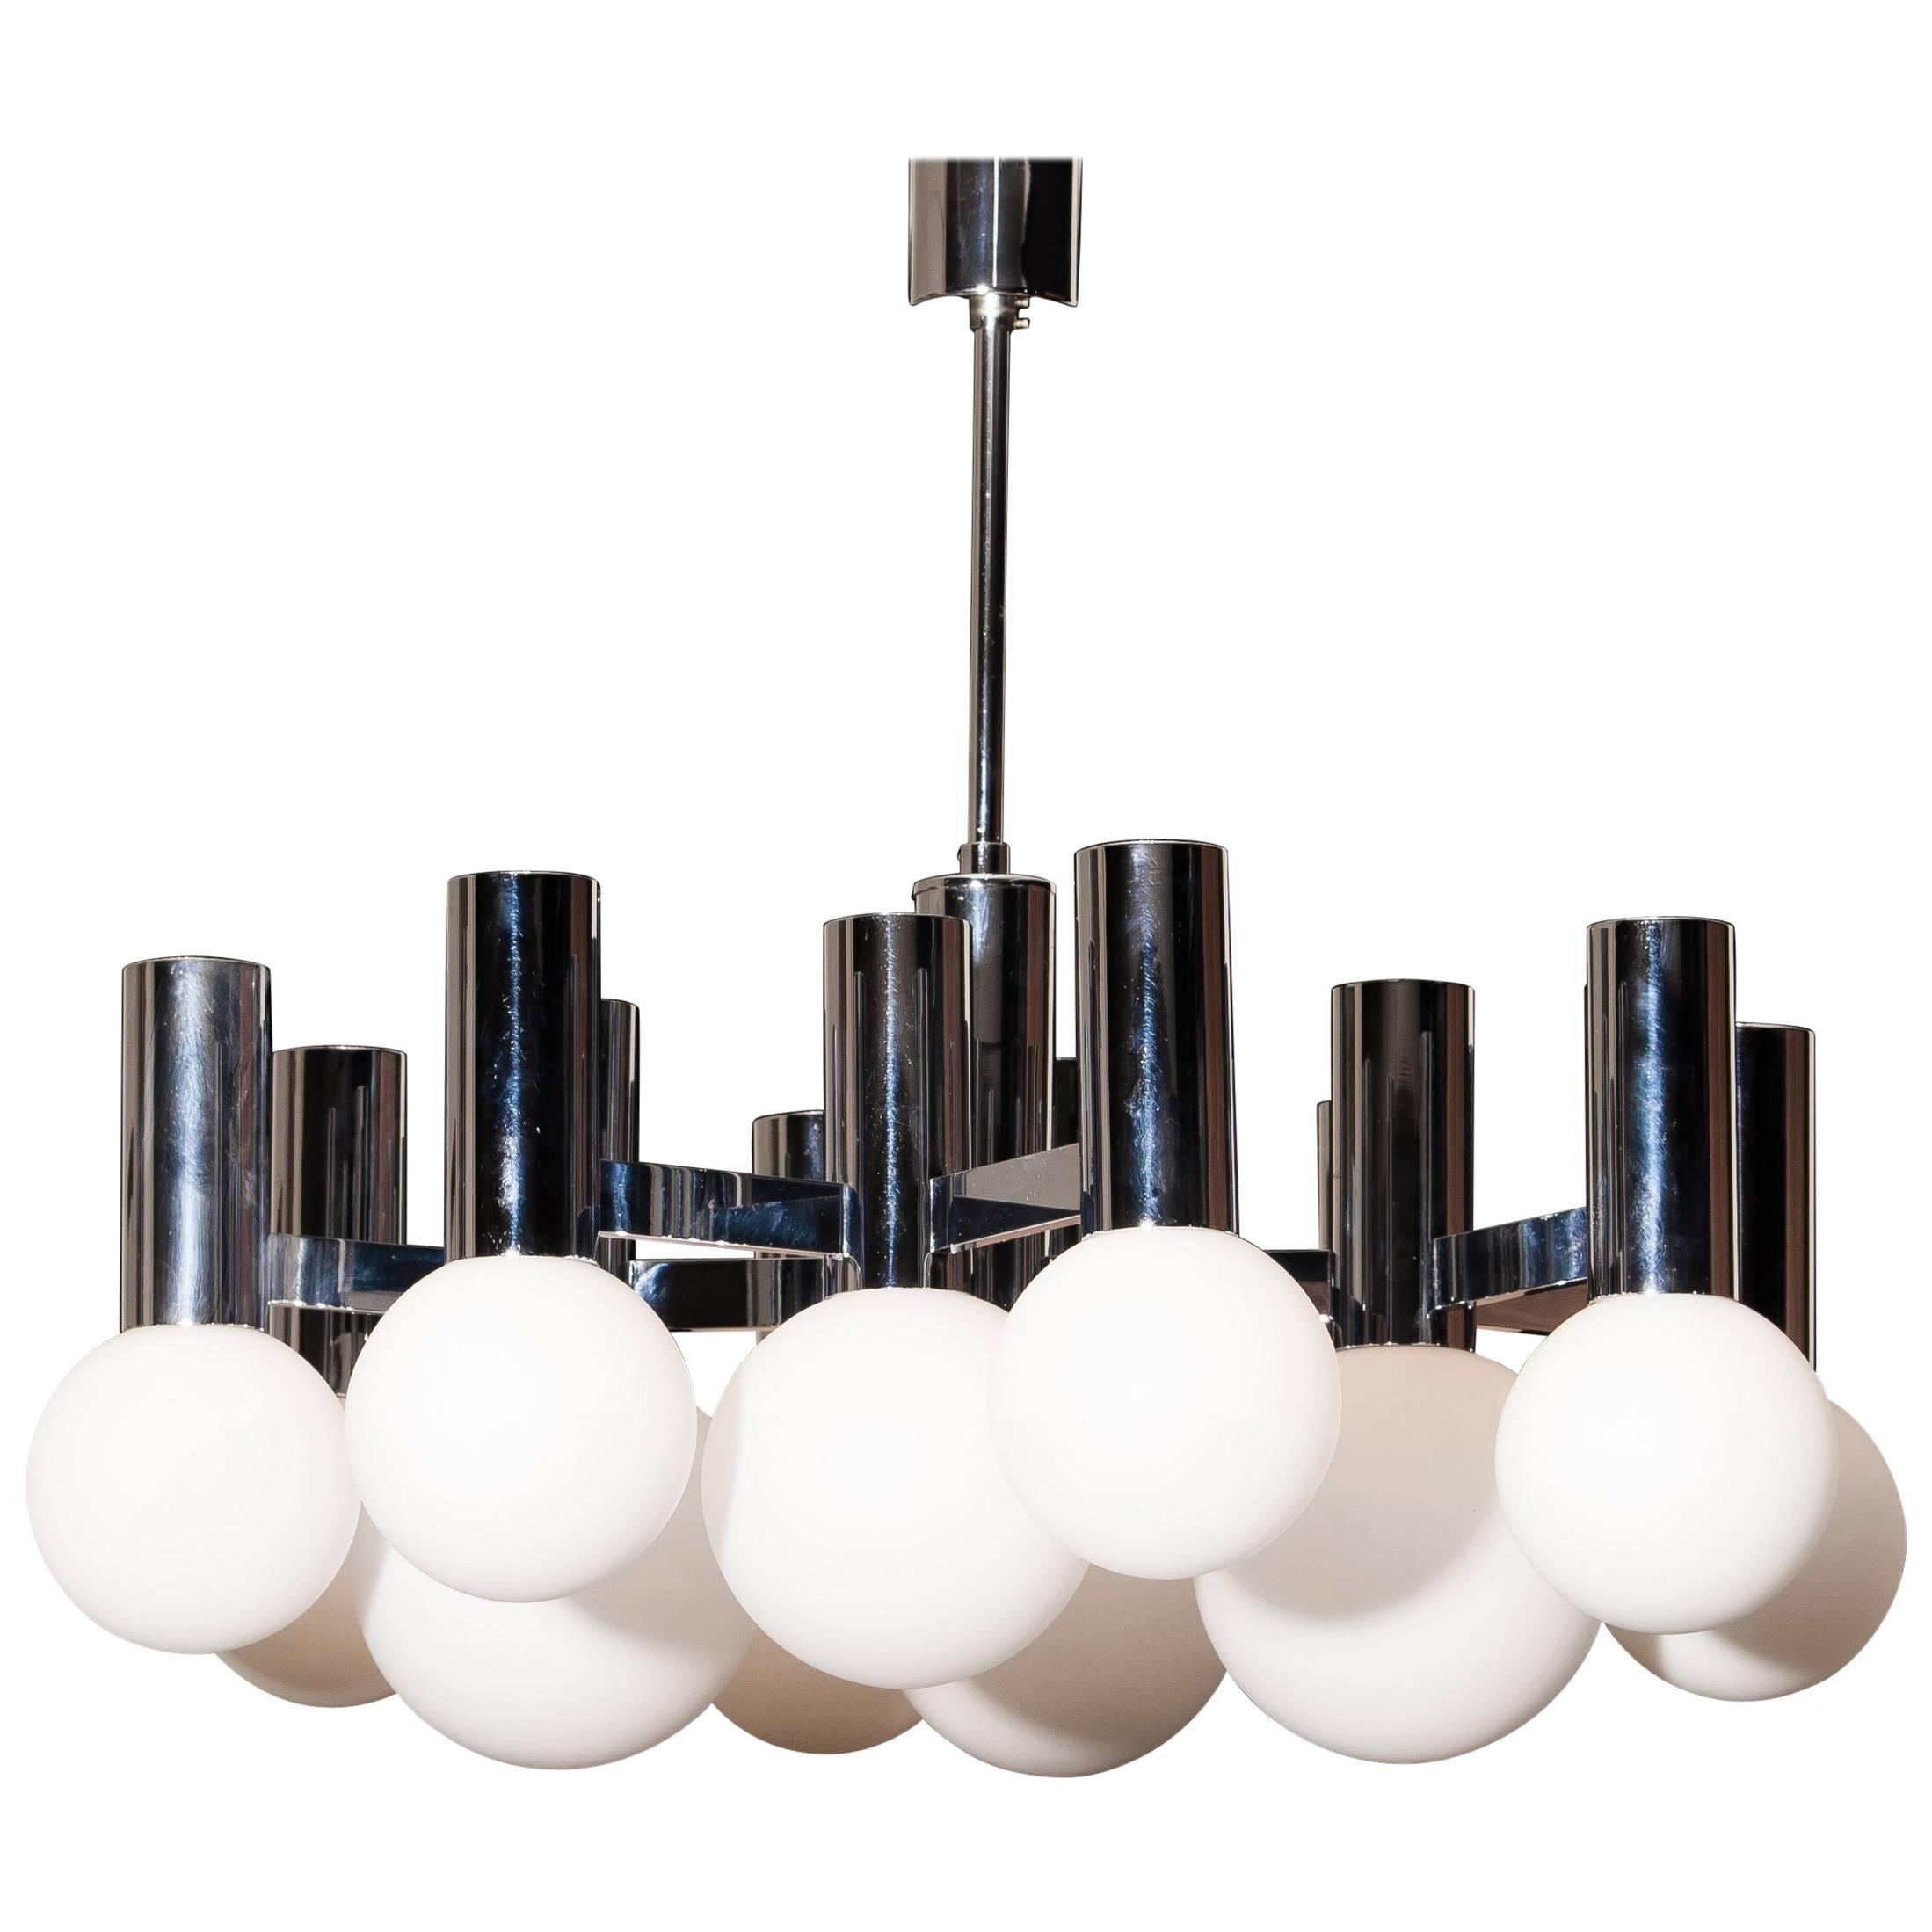 1970s, Chrome and Glass 'Modernist' Chandelier Pendant by Sciolari